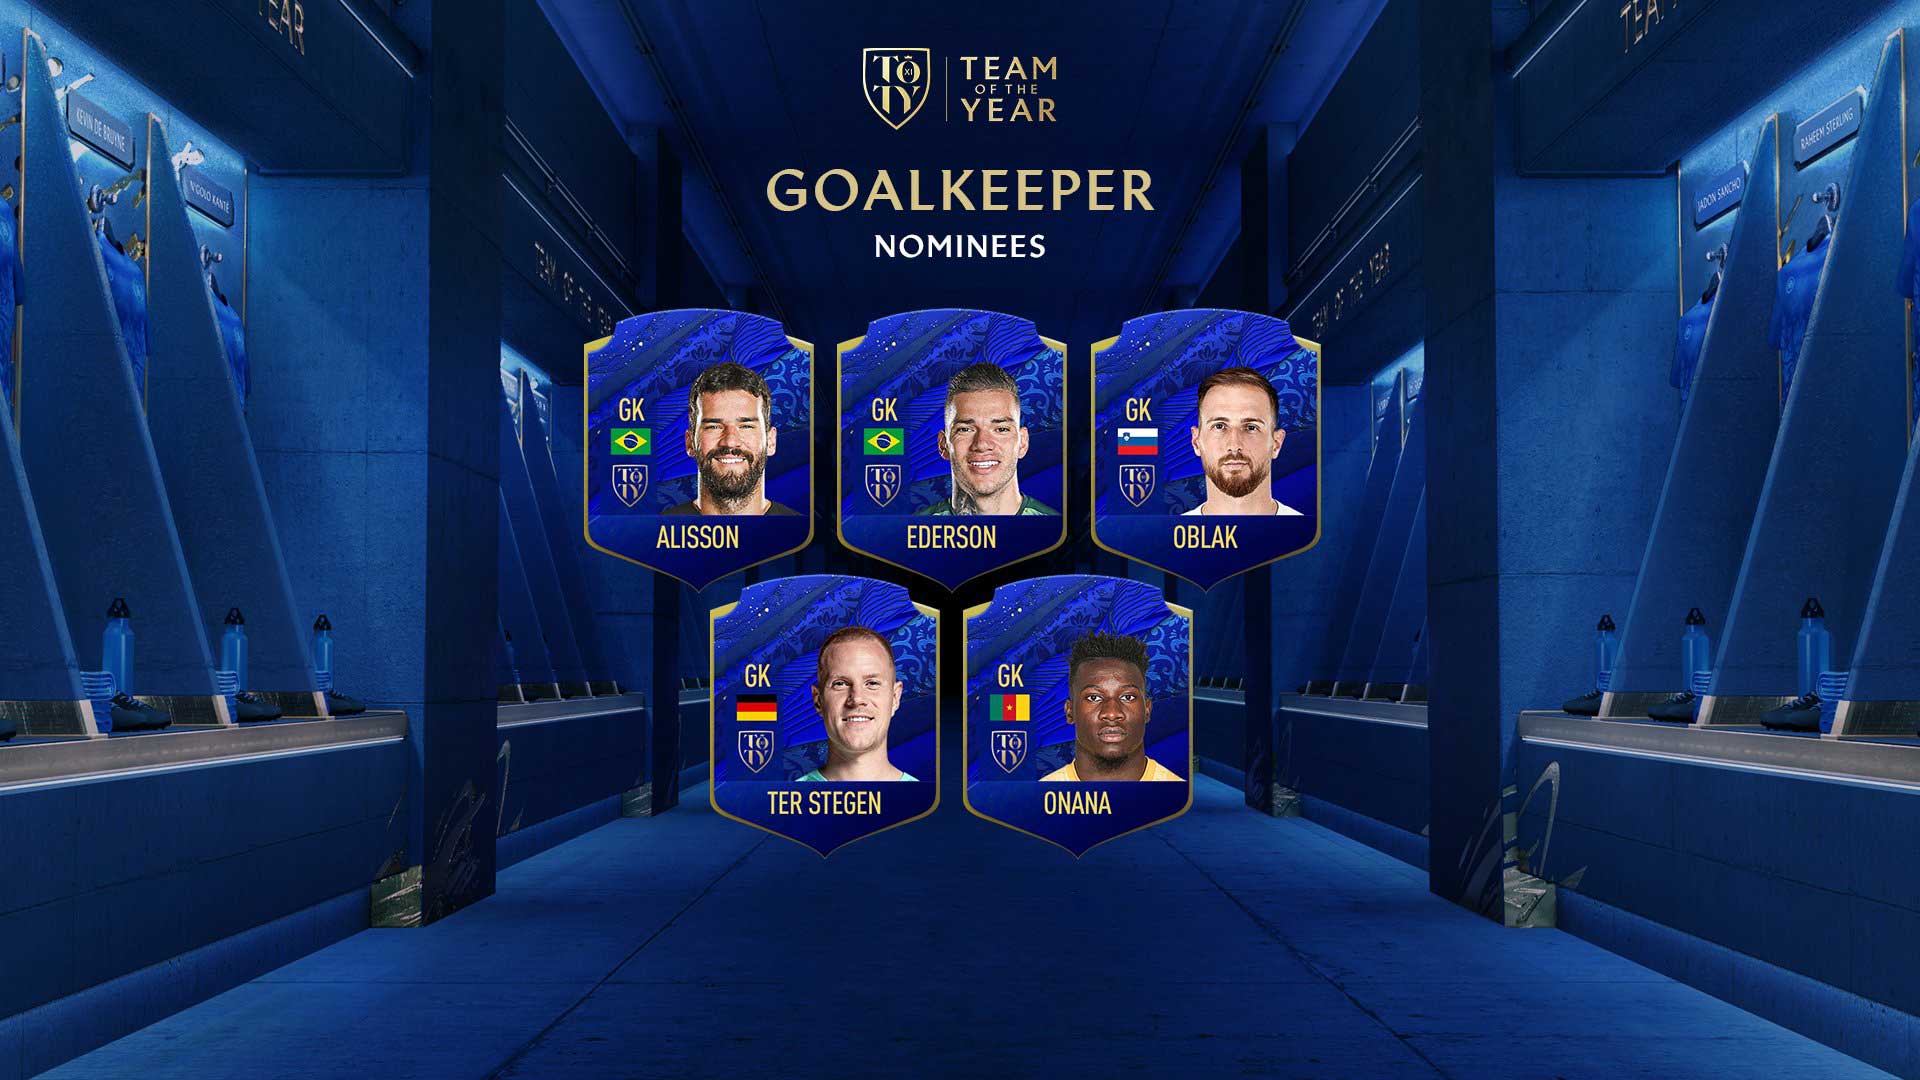 FIFA 20 Team of the Year Nominees Announced